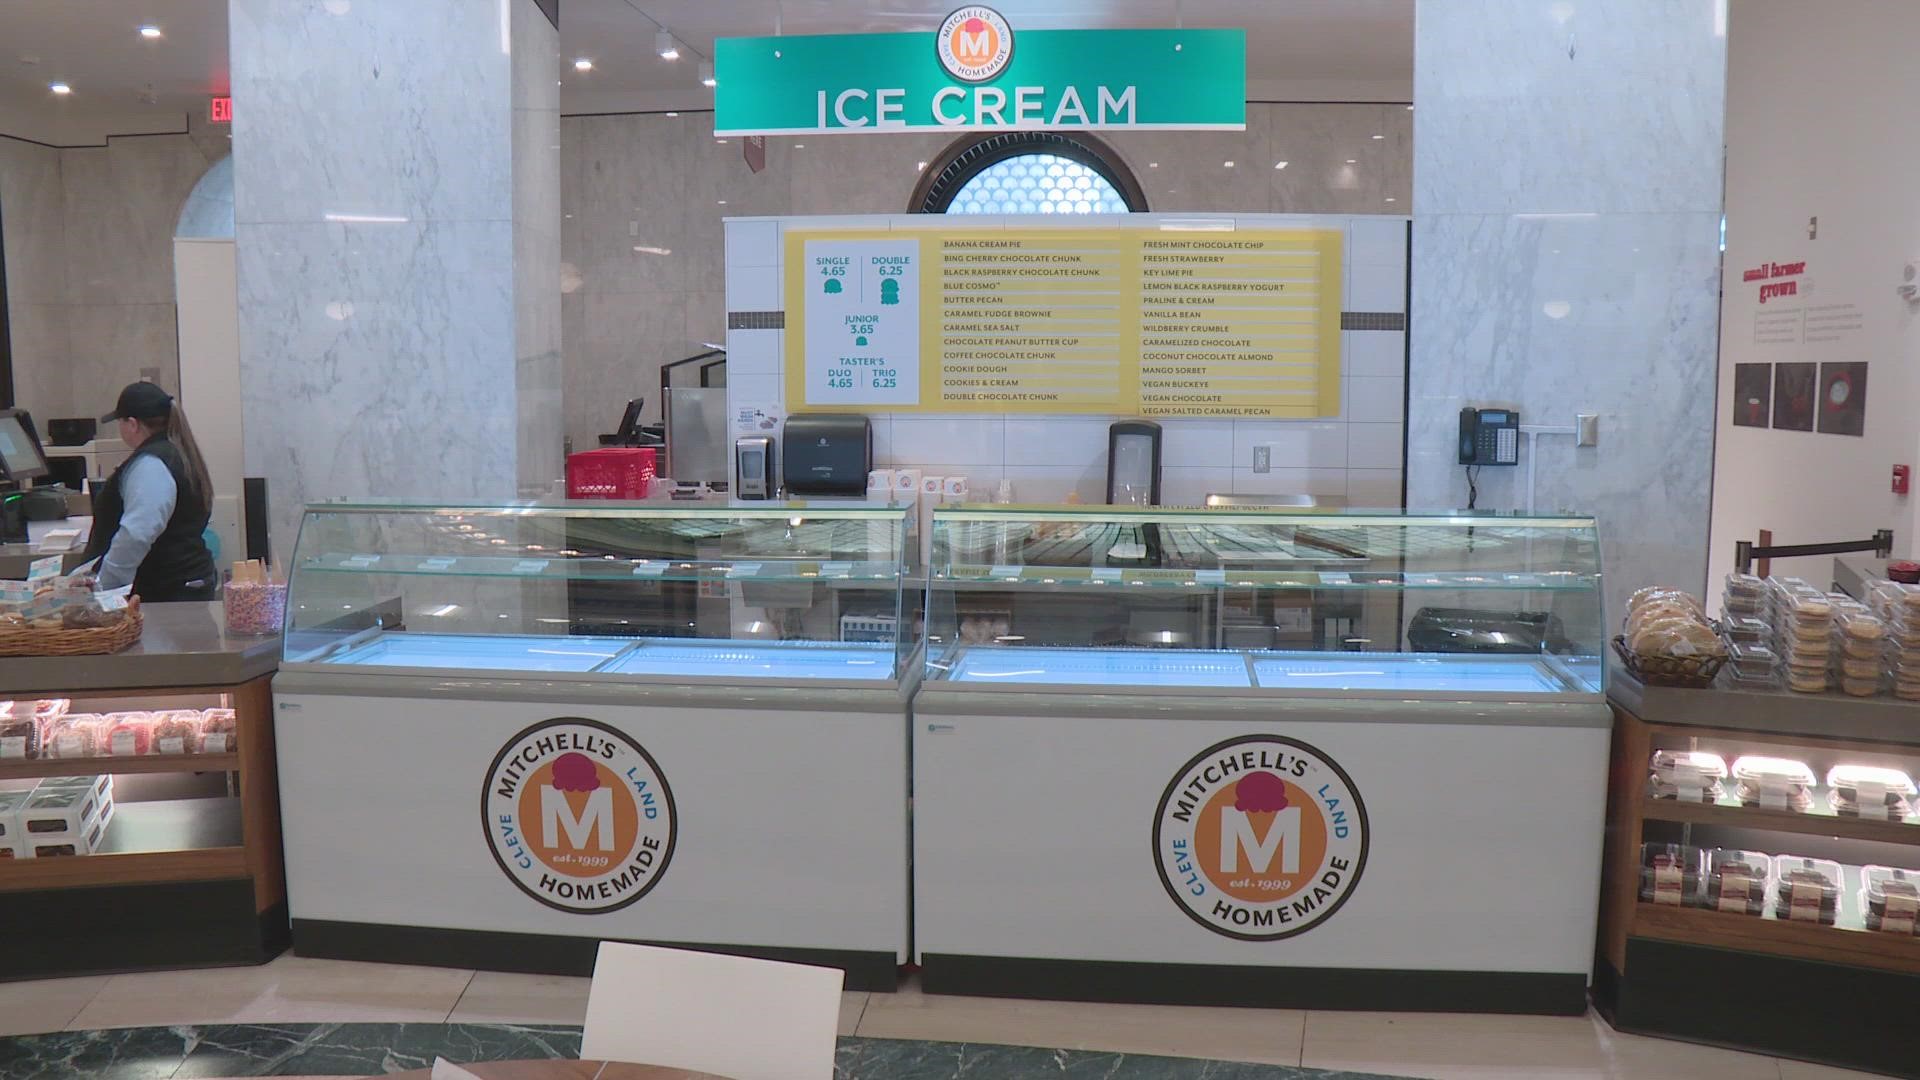 Previously Heinen’s only sold Mitchell’s Ice Cream by the pints, but now shoppers can enjoy a frozen treat in the store.